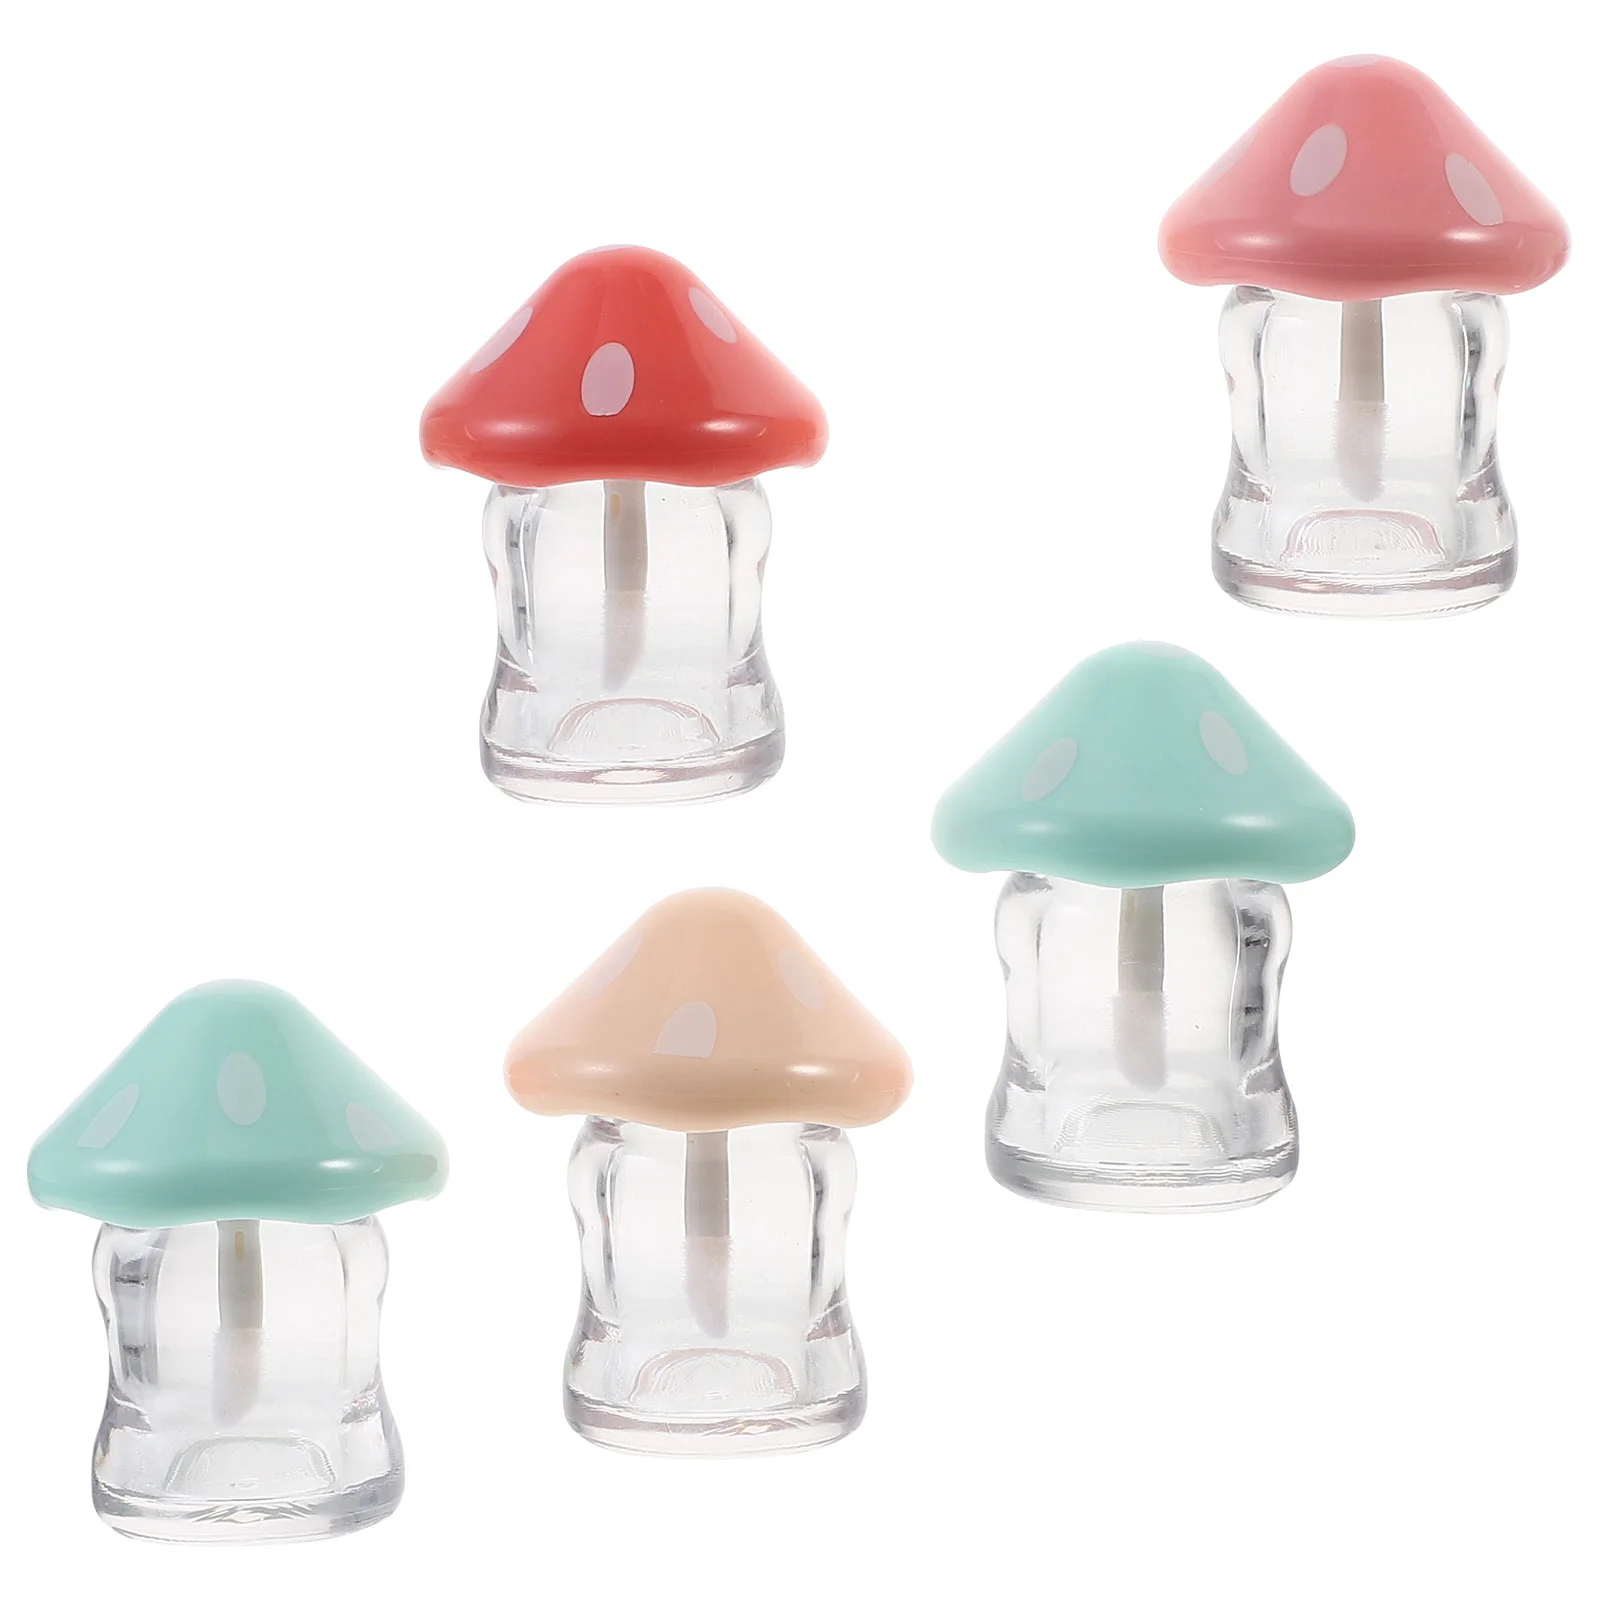 

5pcs Mushroom Lip Gloss Containers Empty Lip Balm Making Kit Lip Balm Tubes For small business